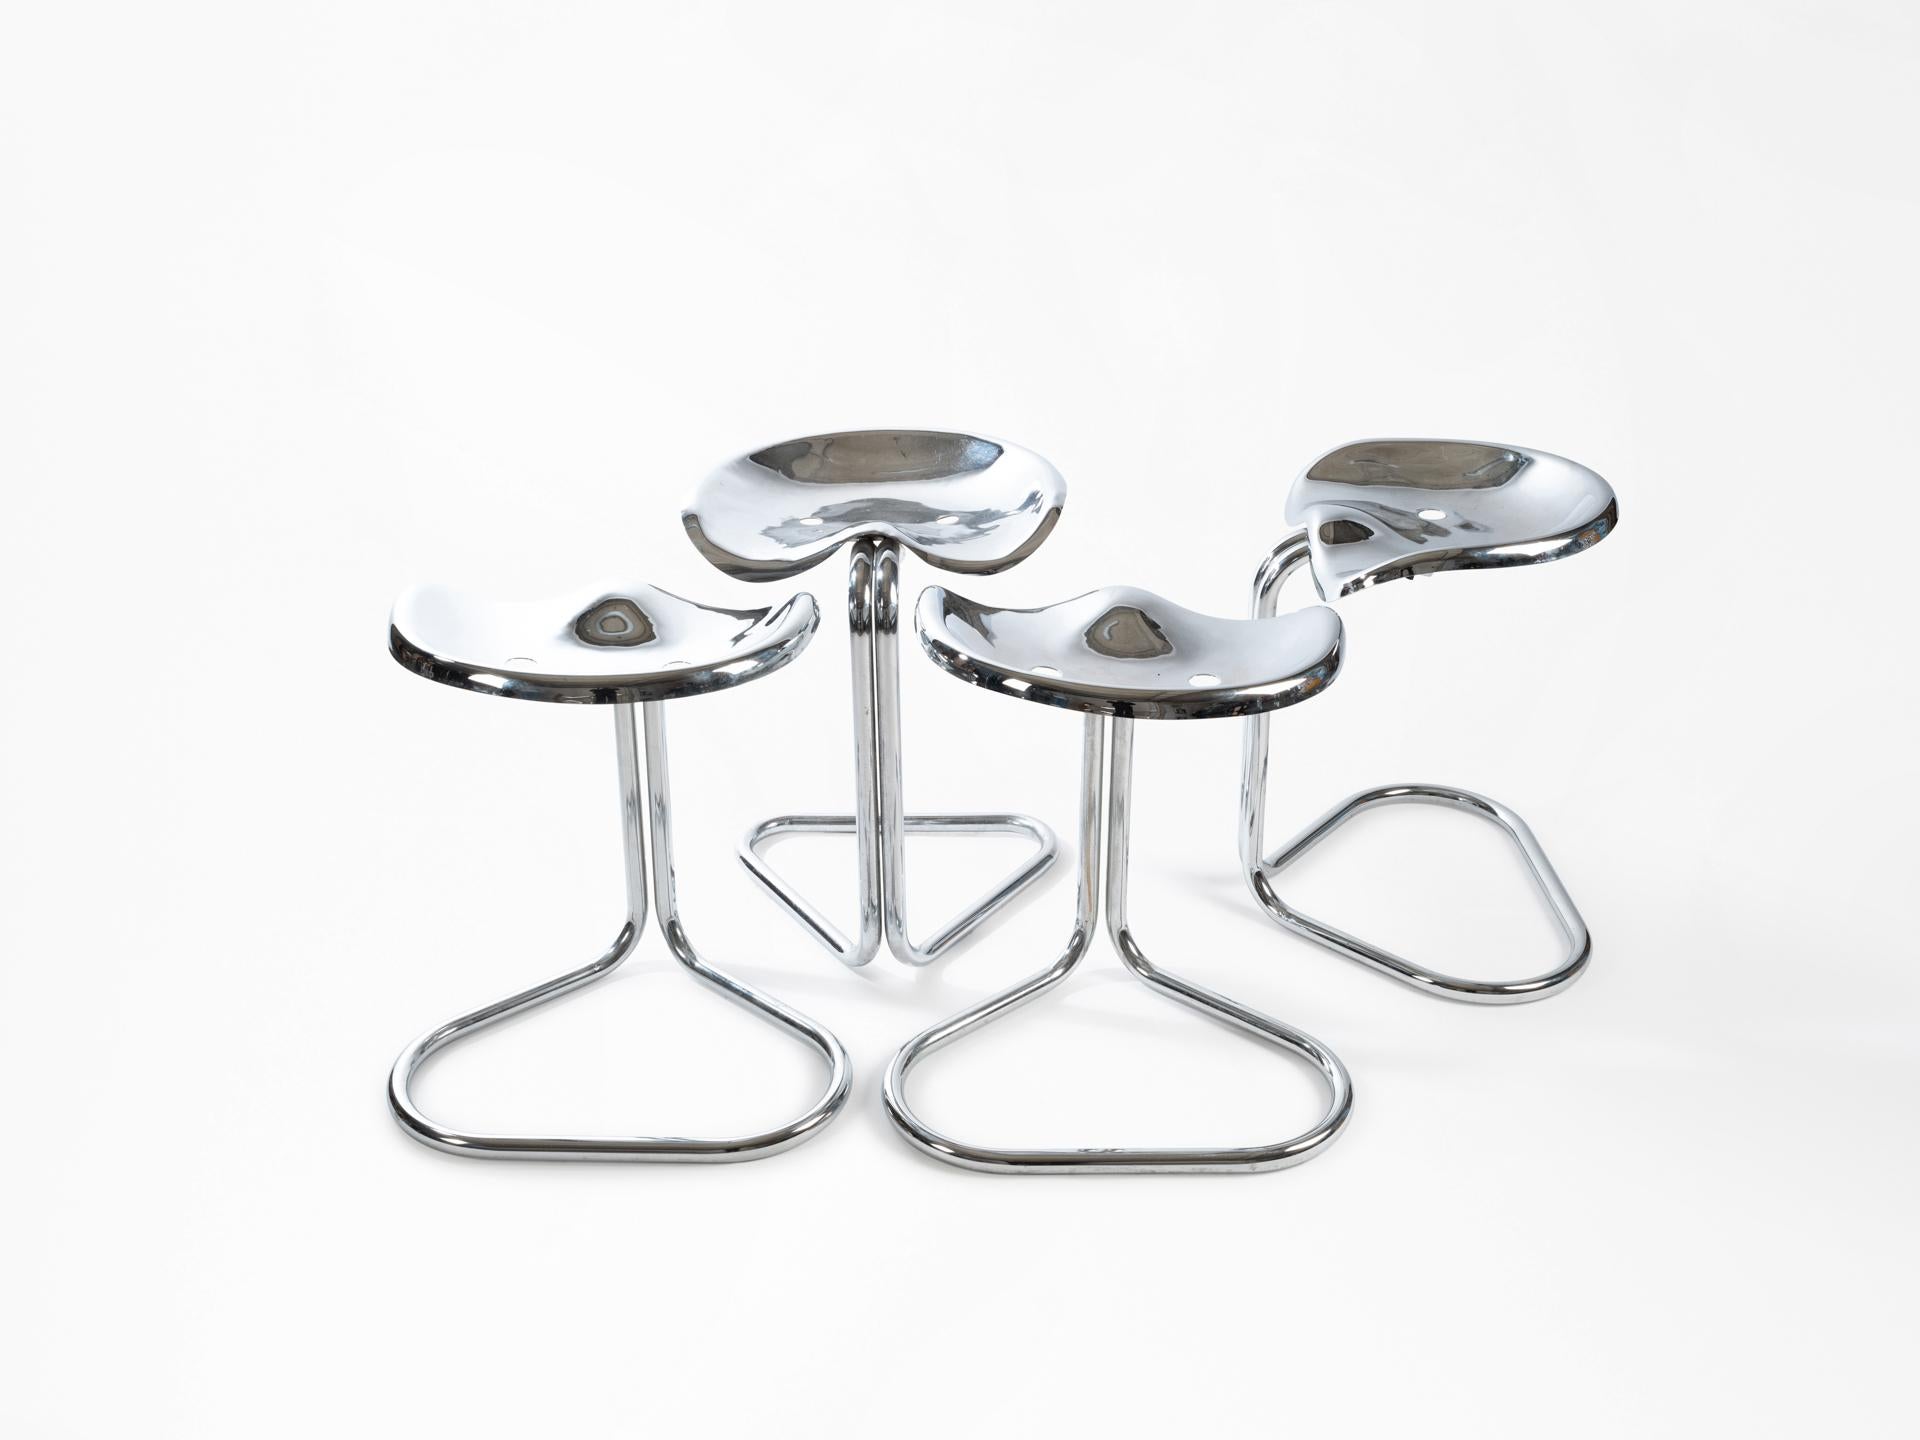 Tractor stools by Rodney Kinsman, designed in the 1960s for OMK (his own company). Kinsman's pieces are considered icons of 20th century British furniture design.